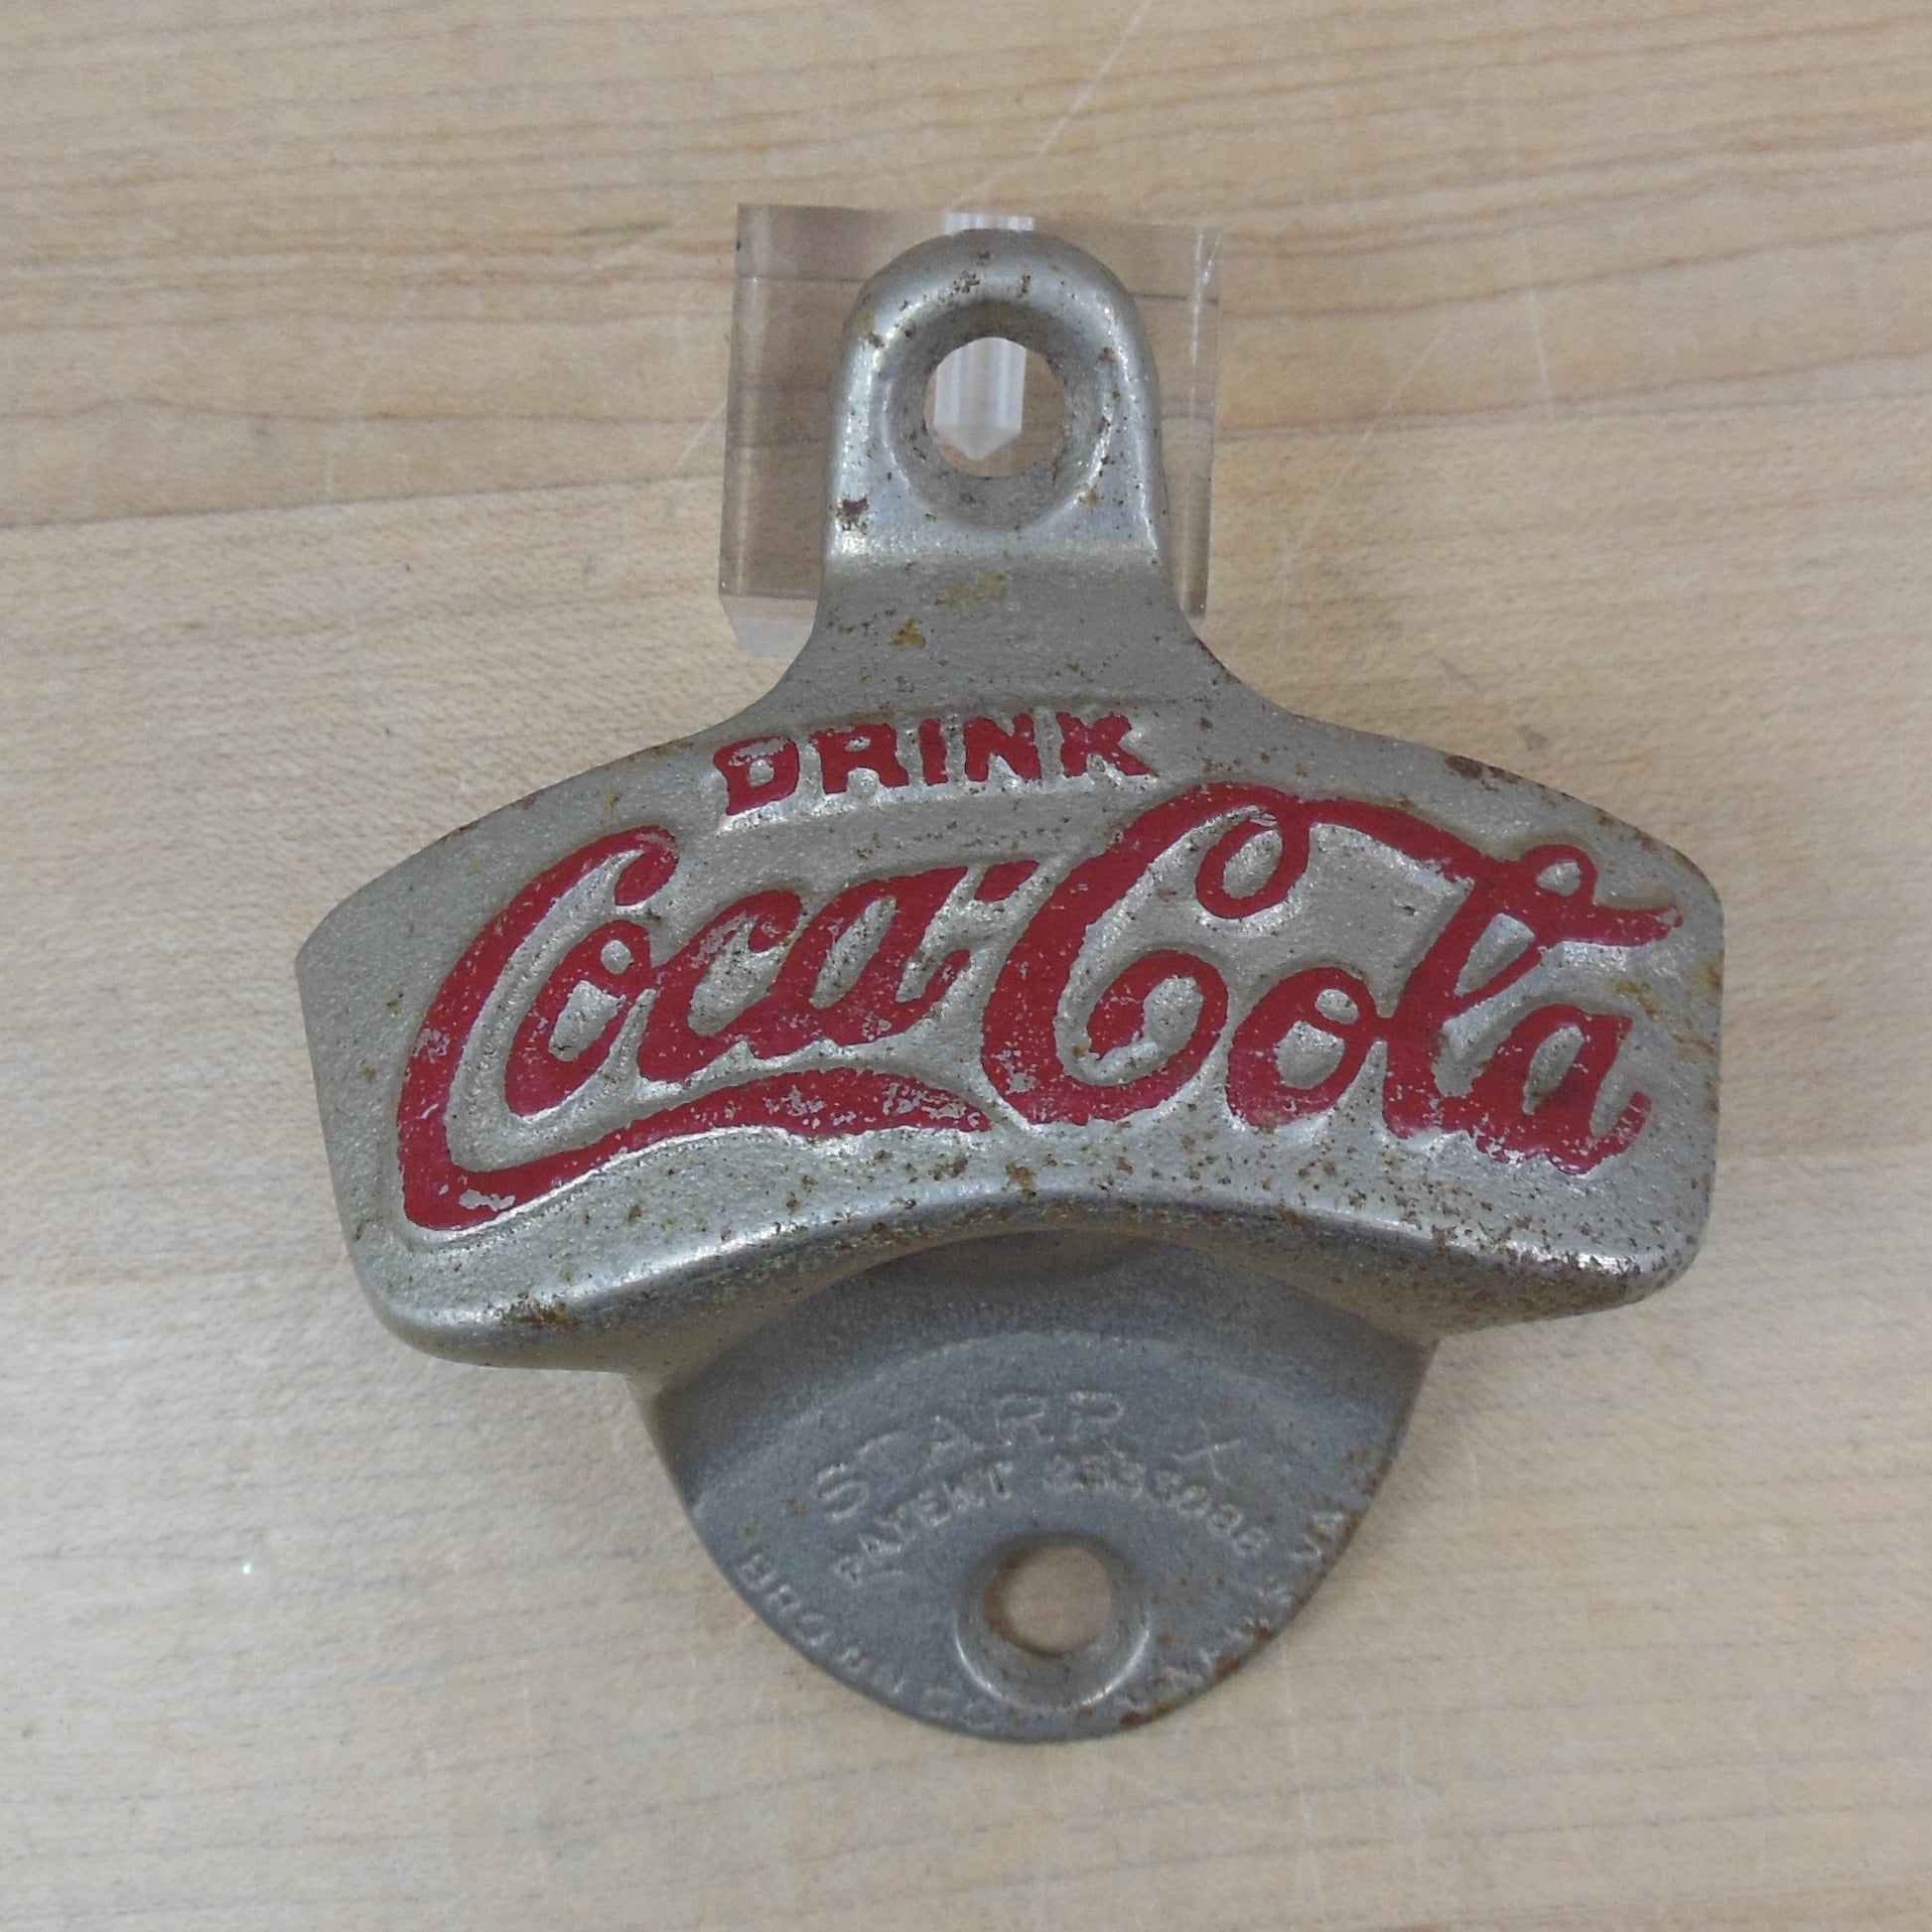 Coca-Cola Starr X Stationary Bottle Opener Wall Mount Brown Co. USA